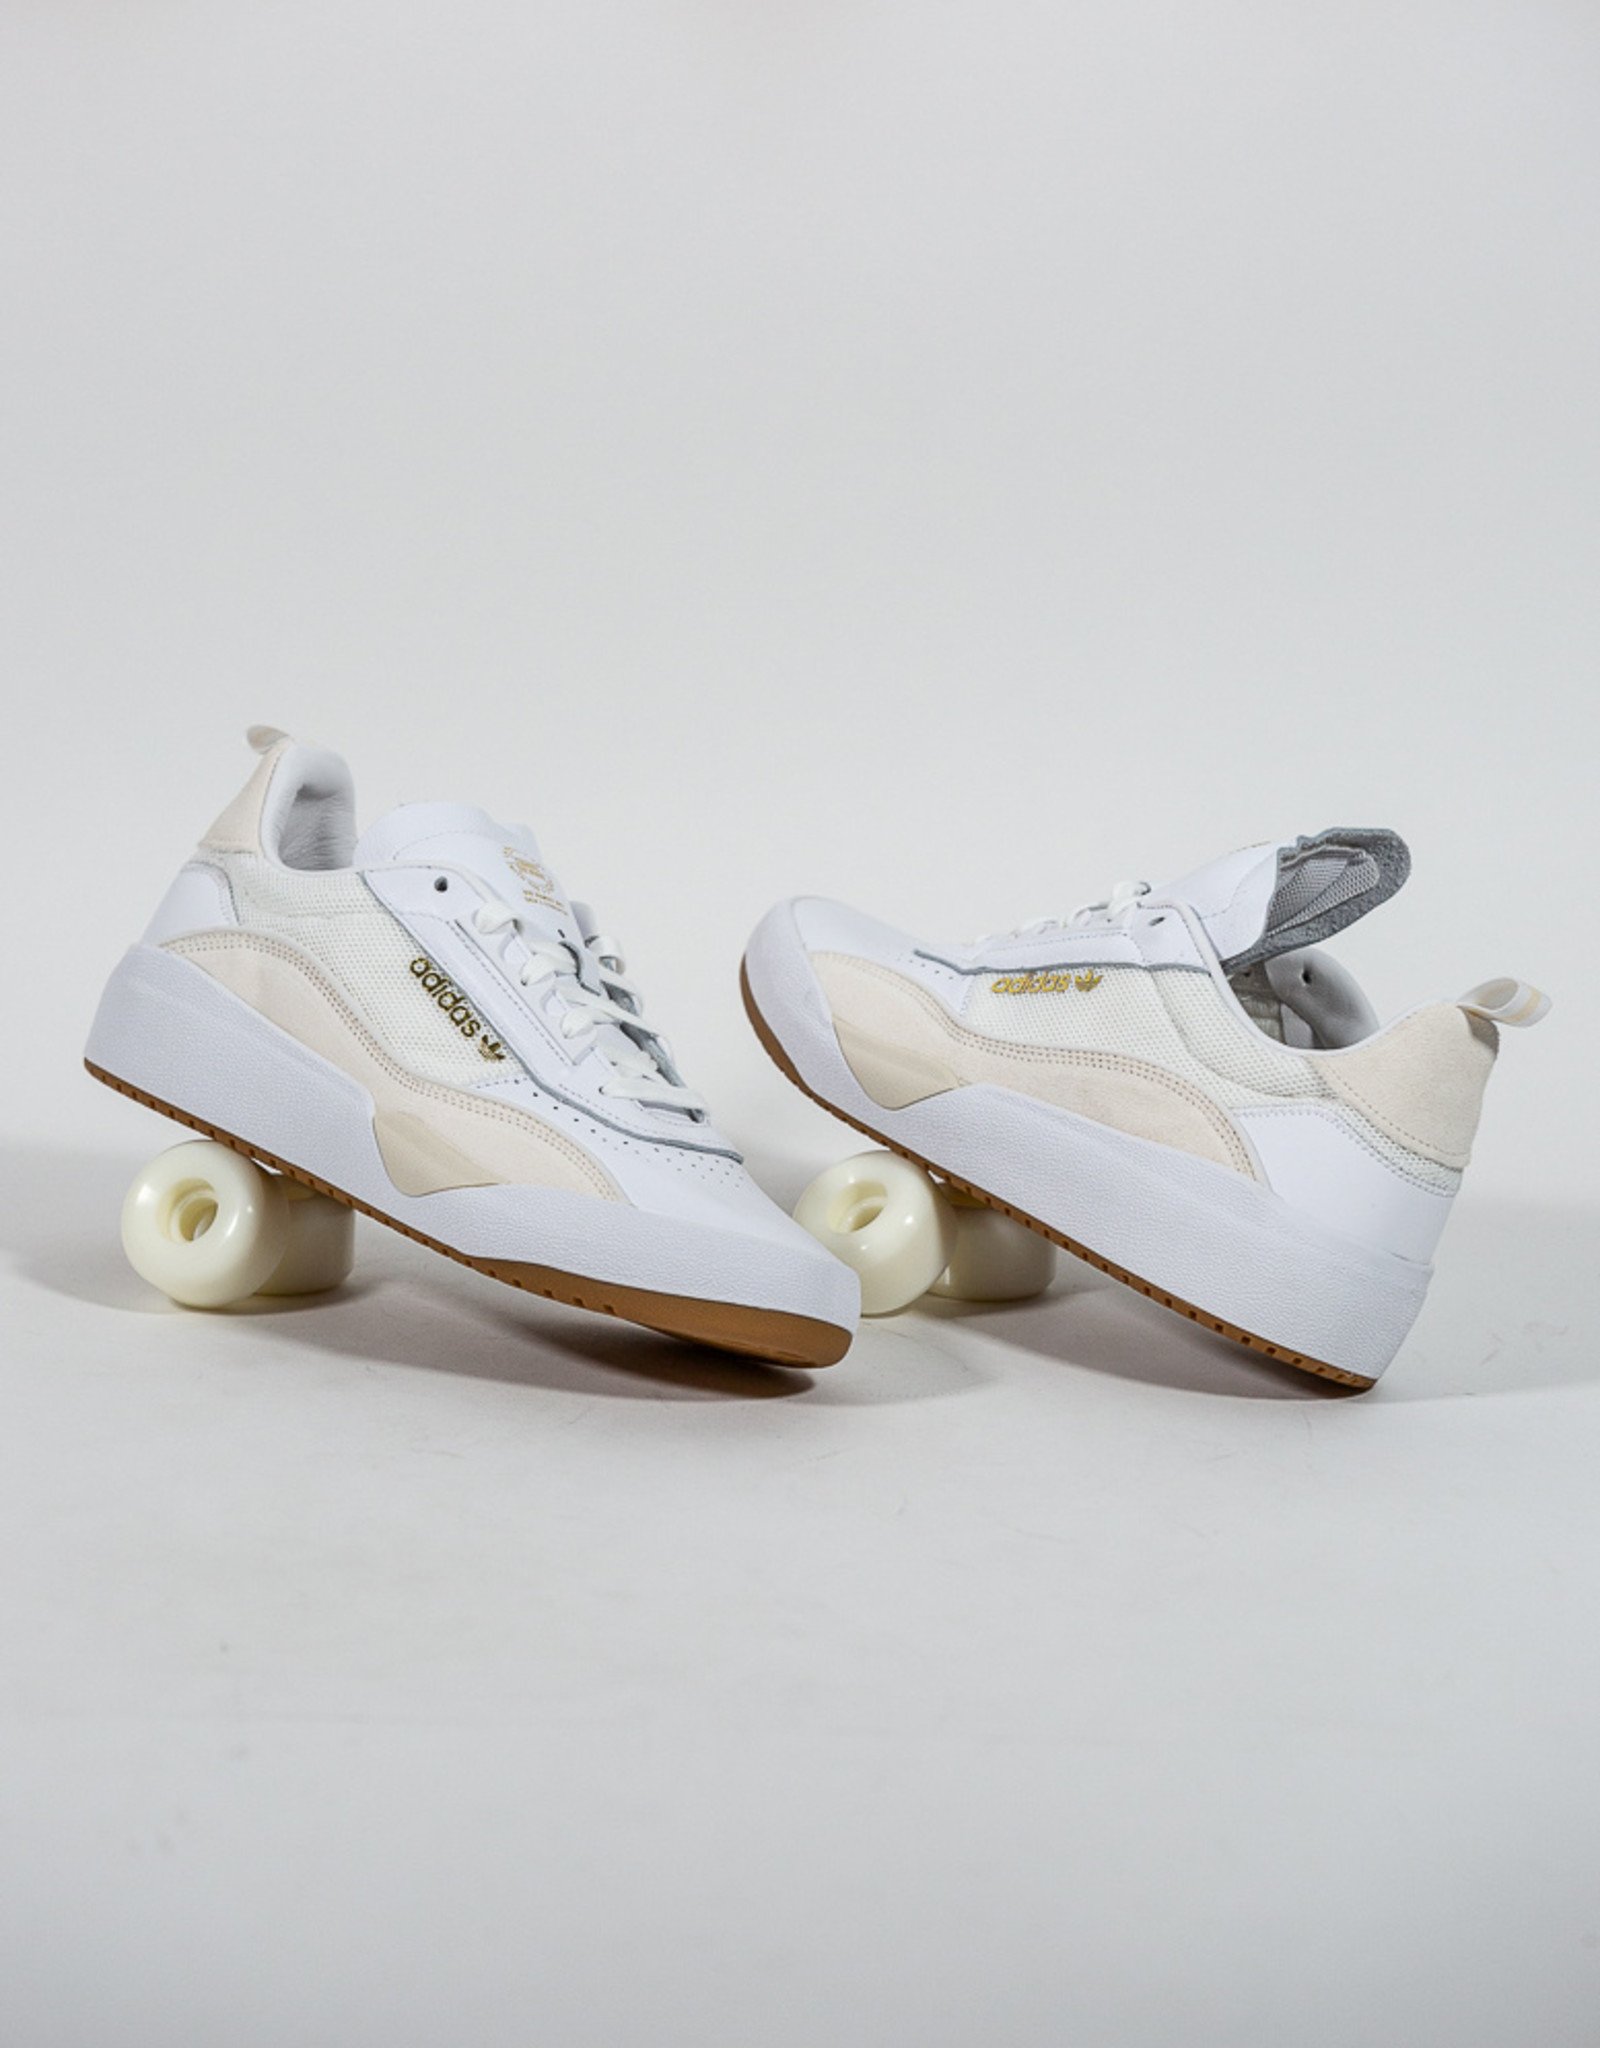 adidas liberty cup white gum & gold shoes